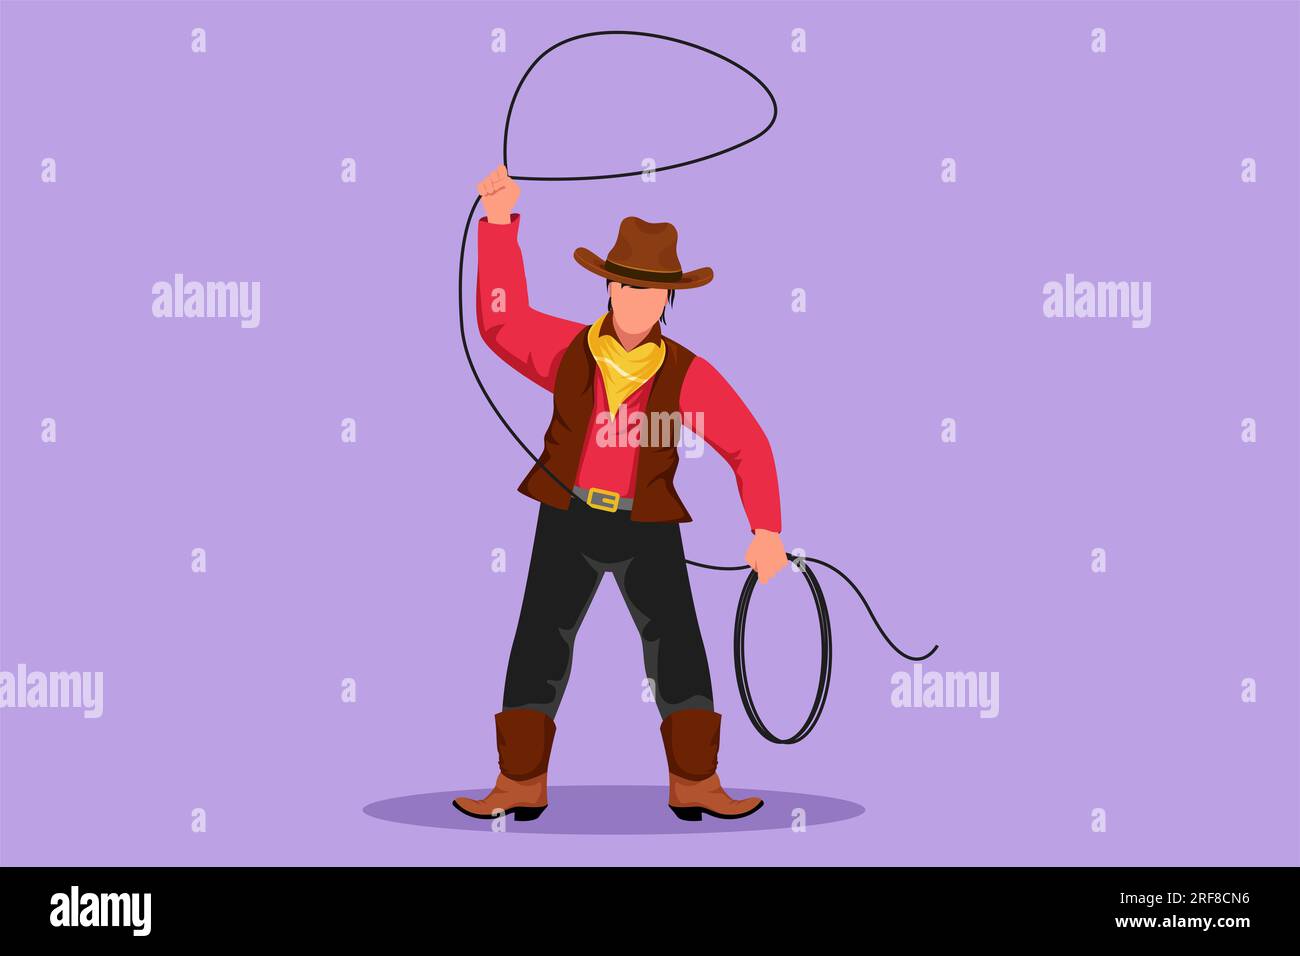 Character flat drawing of western cowboy standing and throwing lasso with wild west elements. Man with cowboy hat rotate the lasso over his head at wi Stock Photo